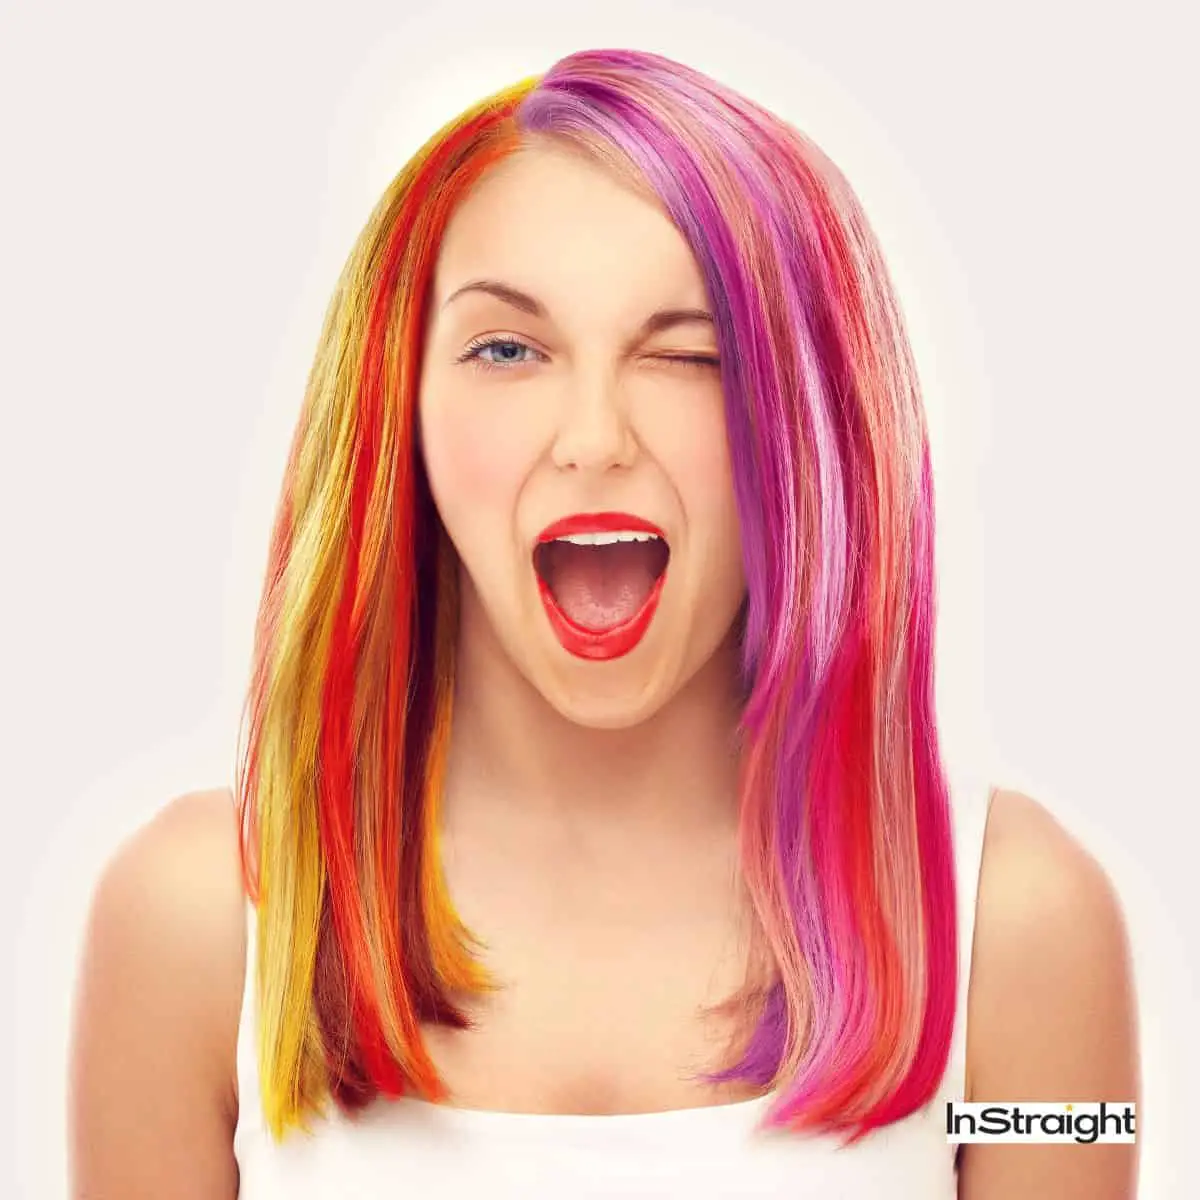 lady with dyed hair